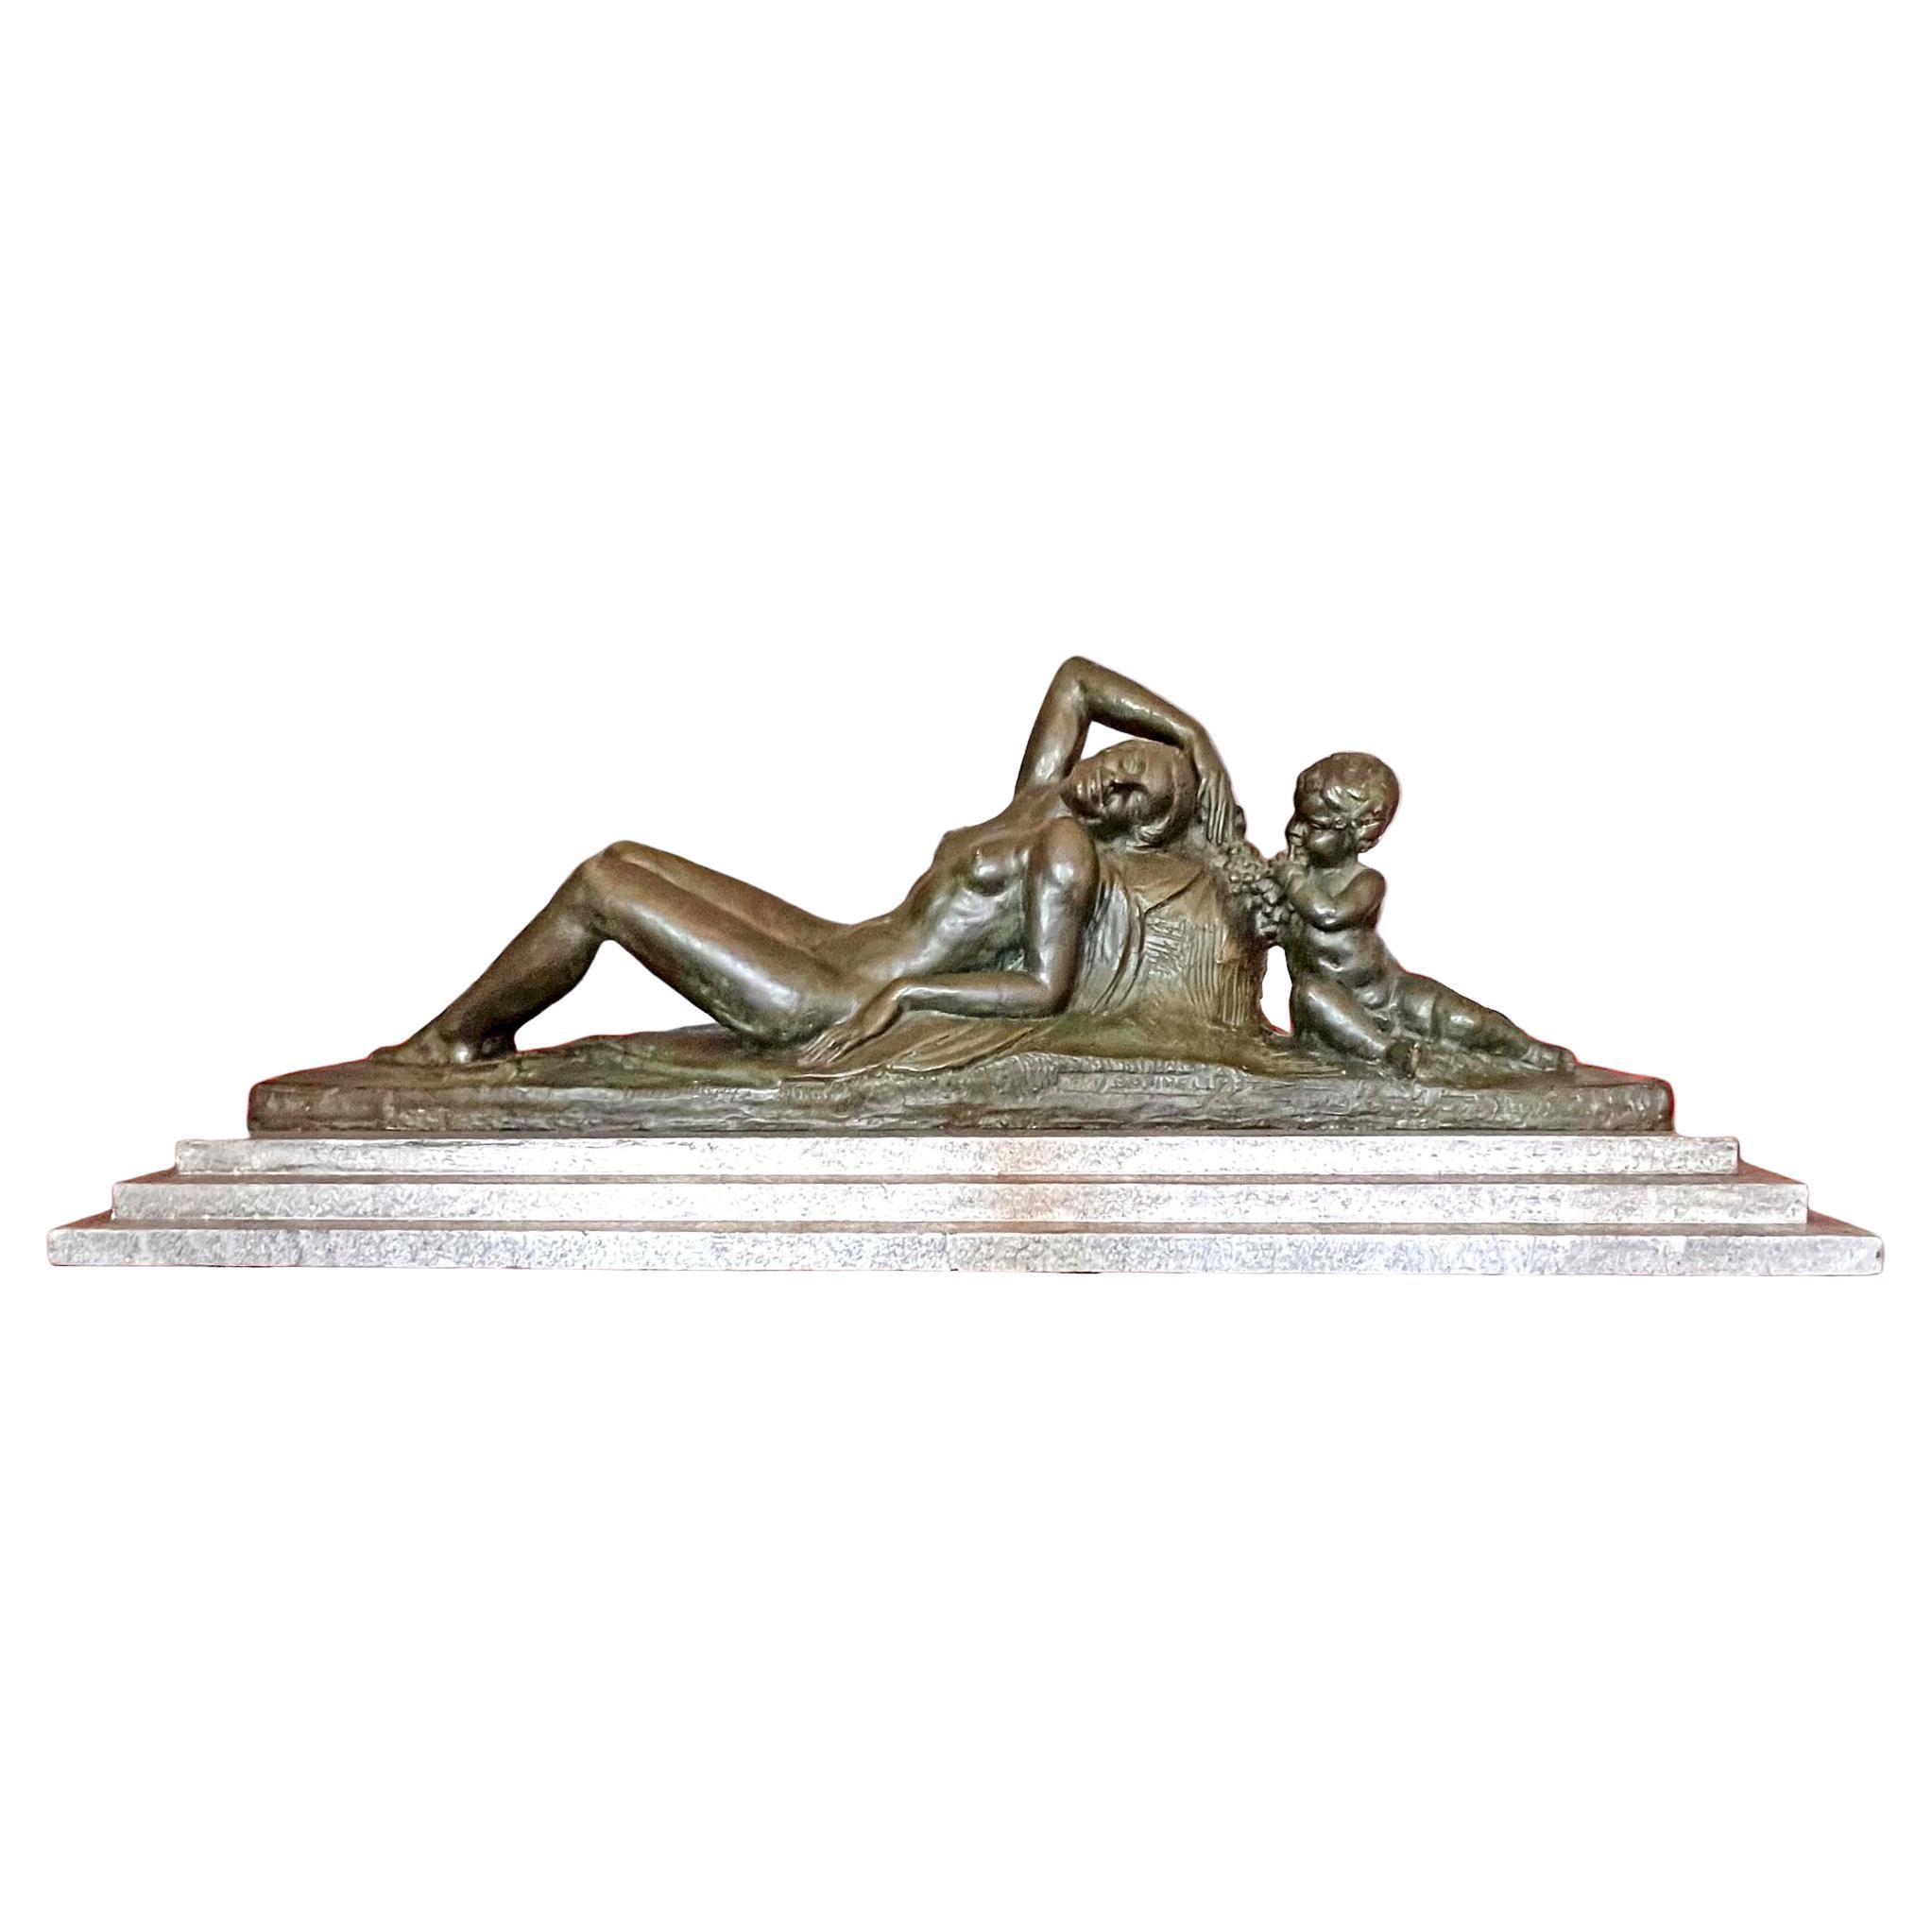 Tall Art Deco Bronze Sculpture by Louis Marcel Botinelly